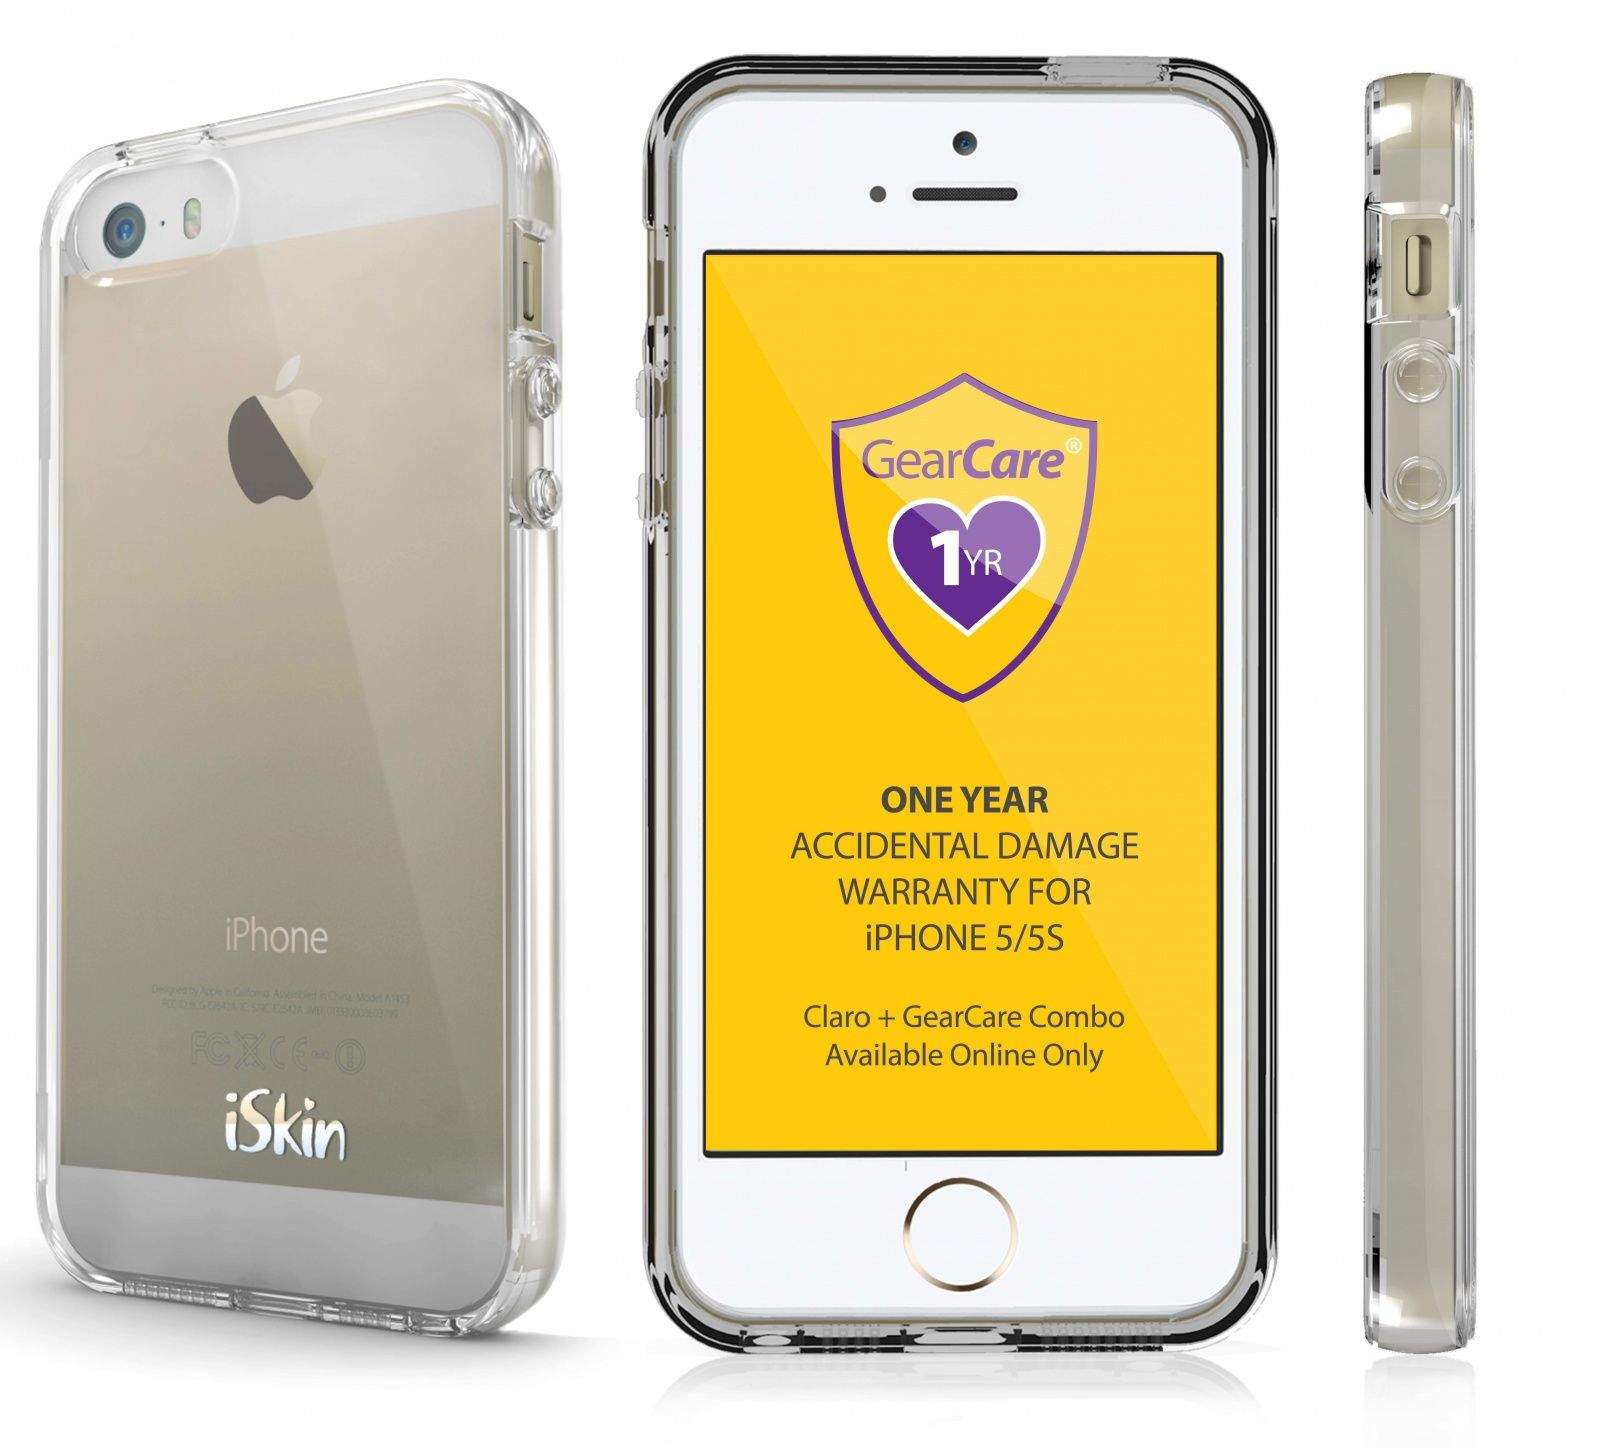 iSkin s Claro GearCare Combo Is An iPhone Case With Accident Insurance  